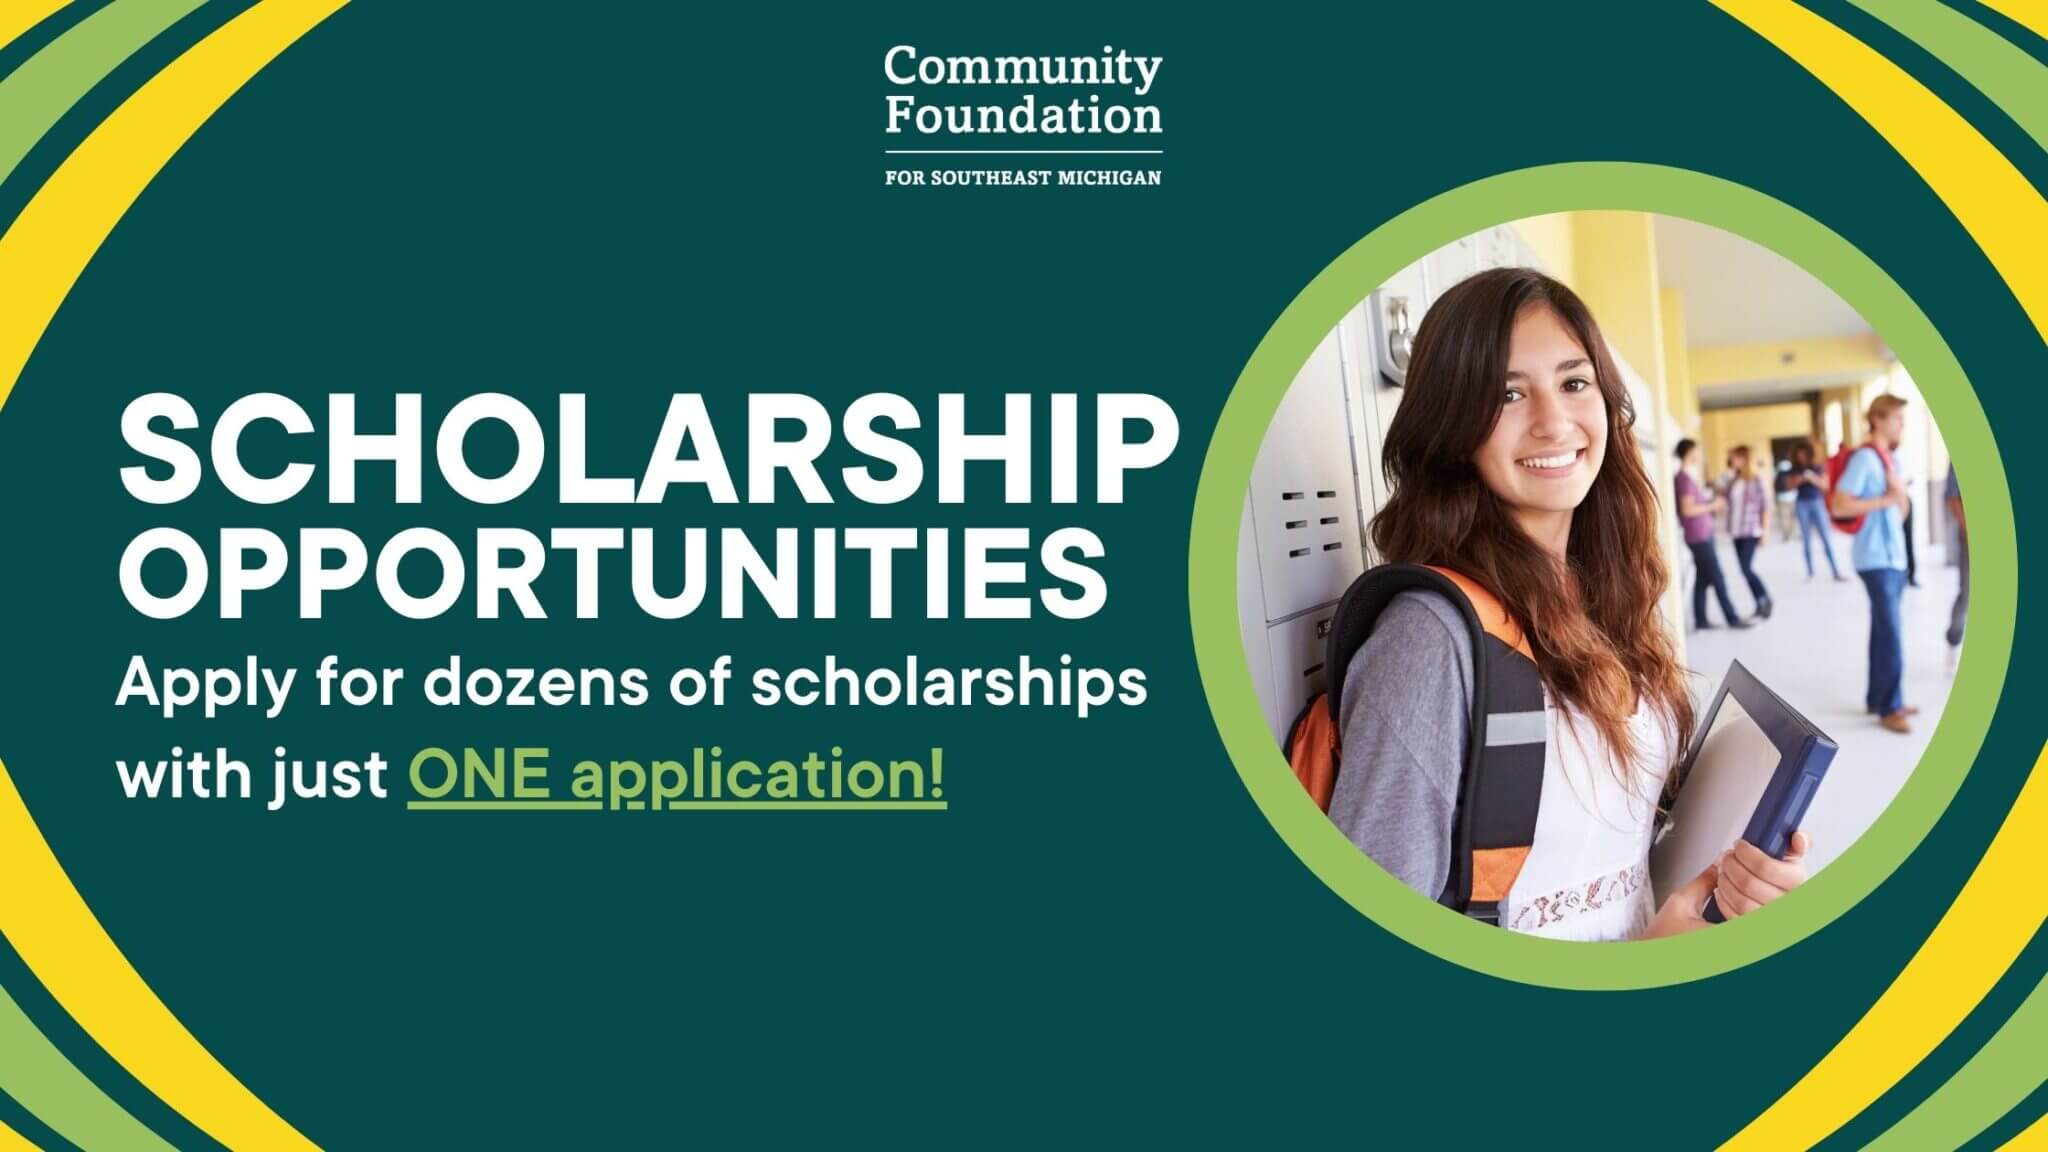 Scholarships available at the Community Foundation